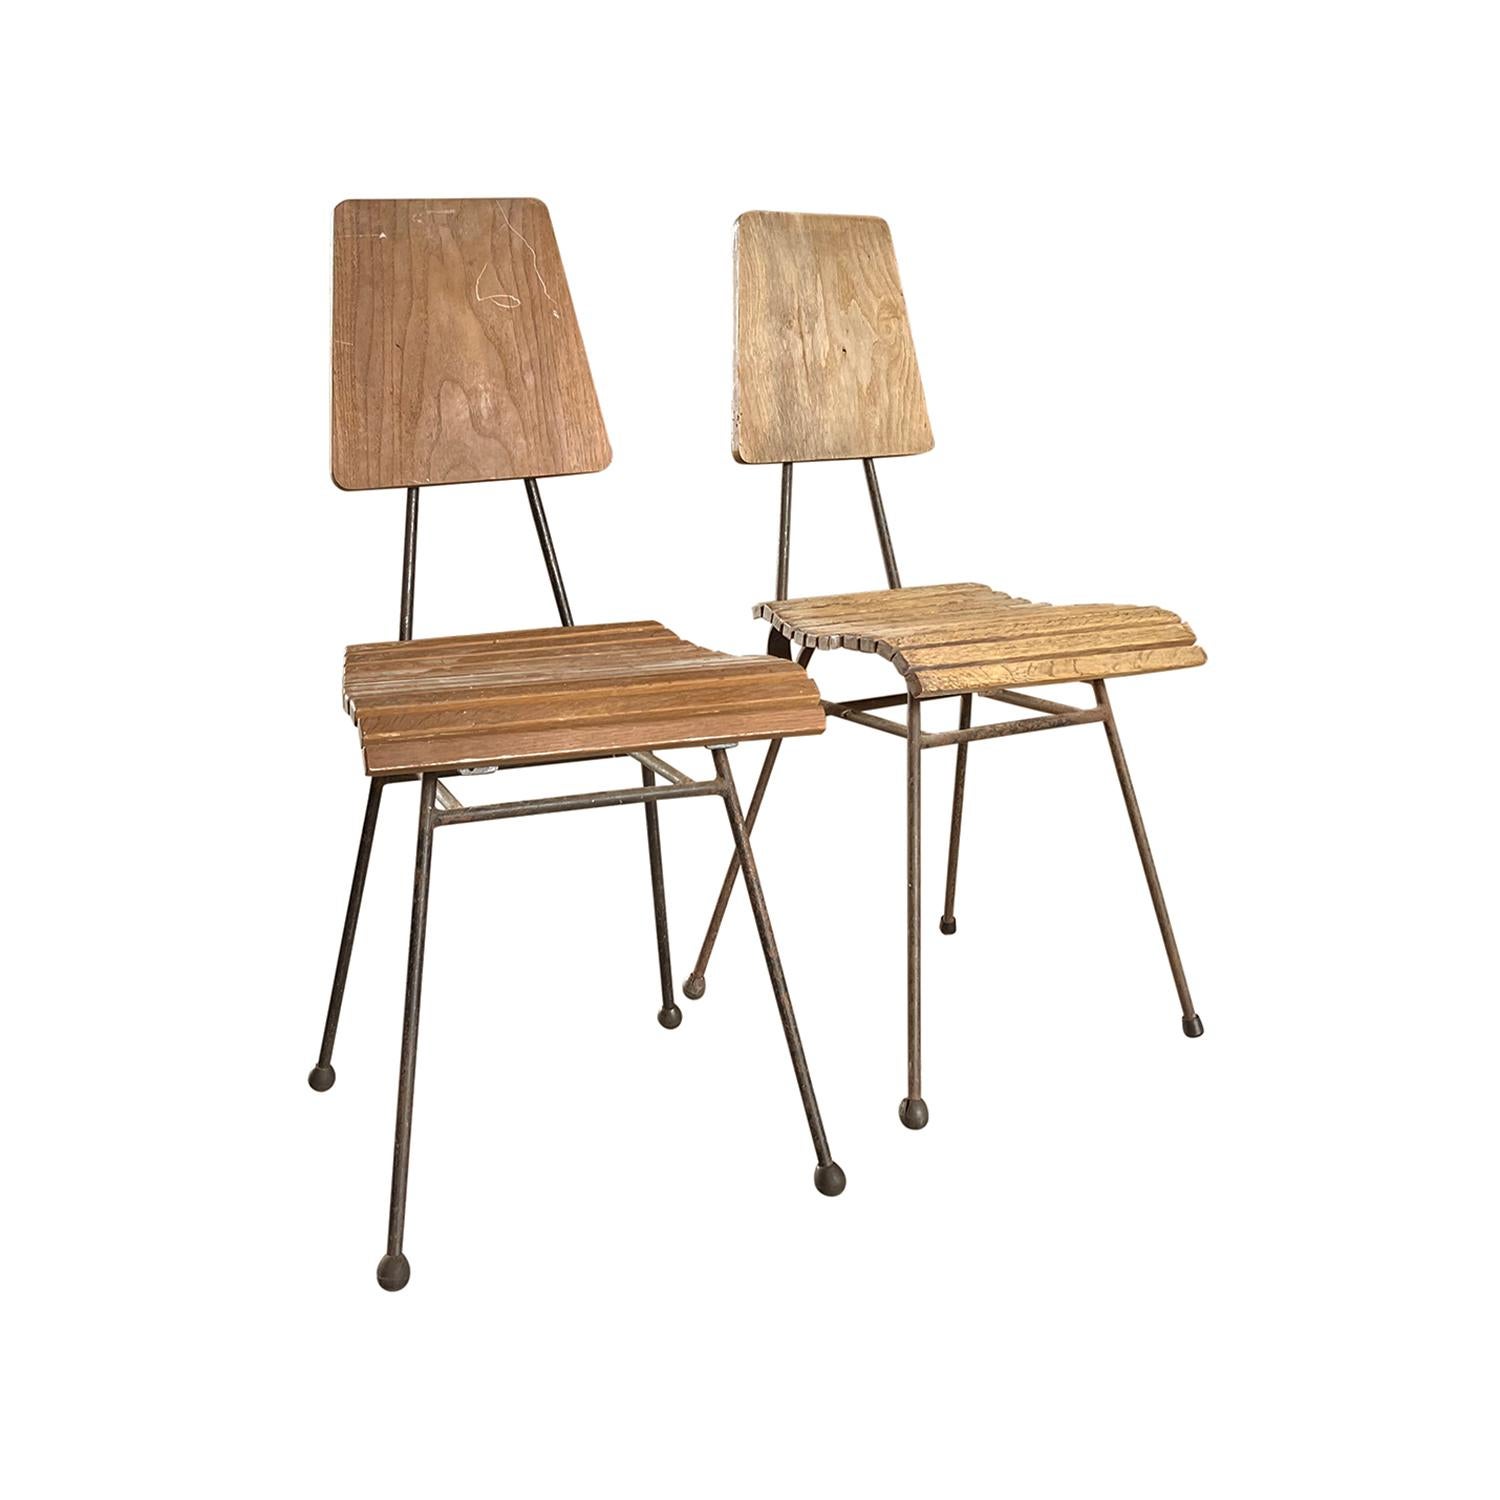 Hand-Crafted 20th Century Pair of Vintage Italian Mid-Century Modern Teakwood Side Chairs For Sale